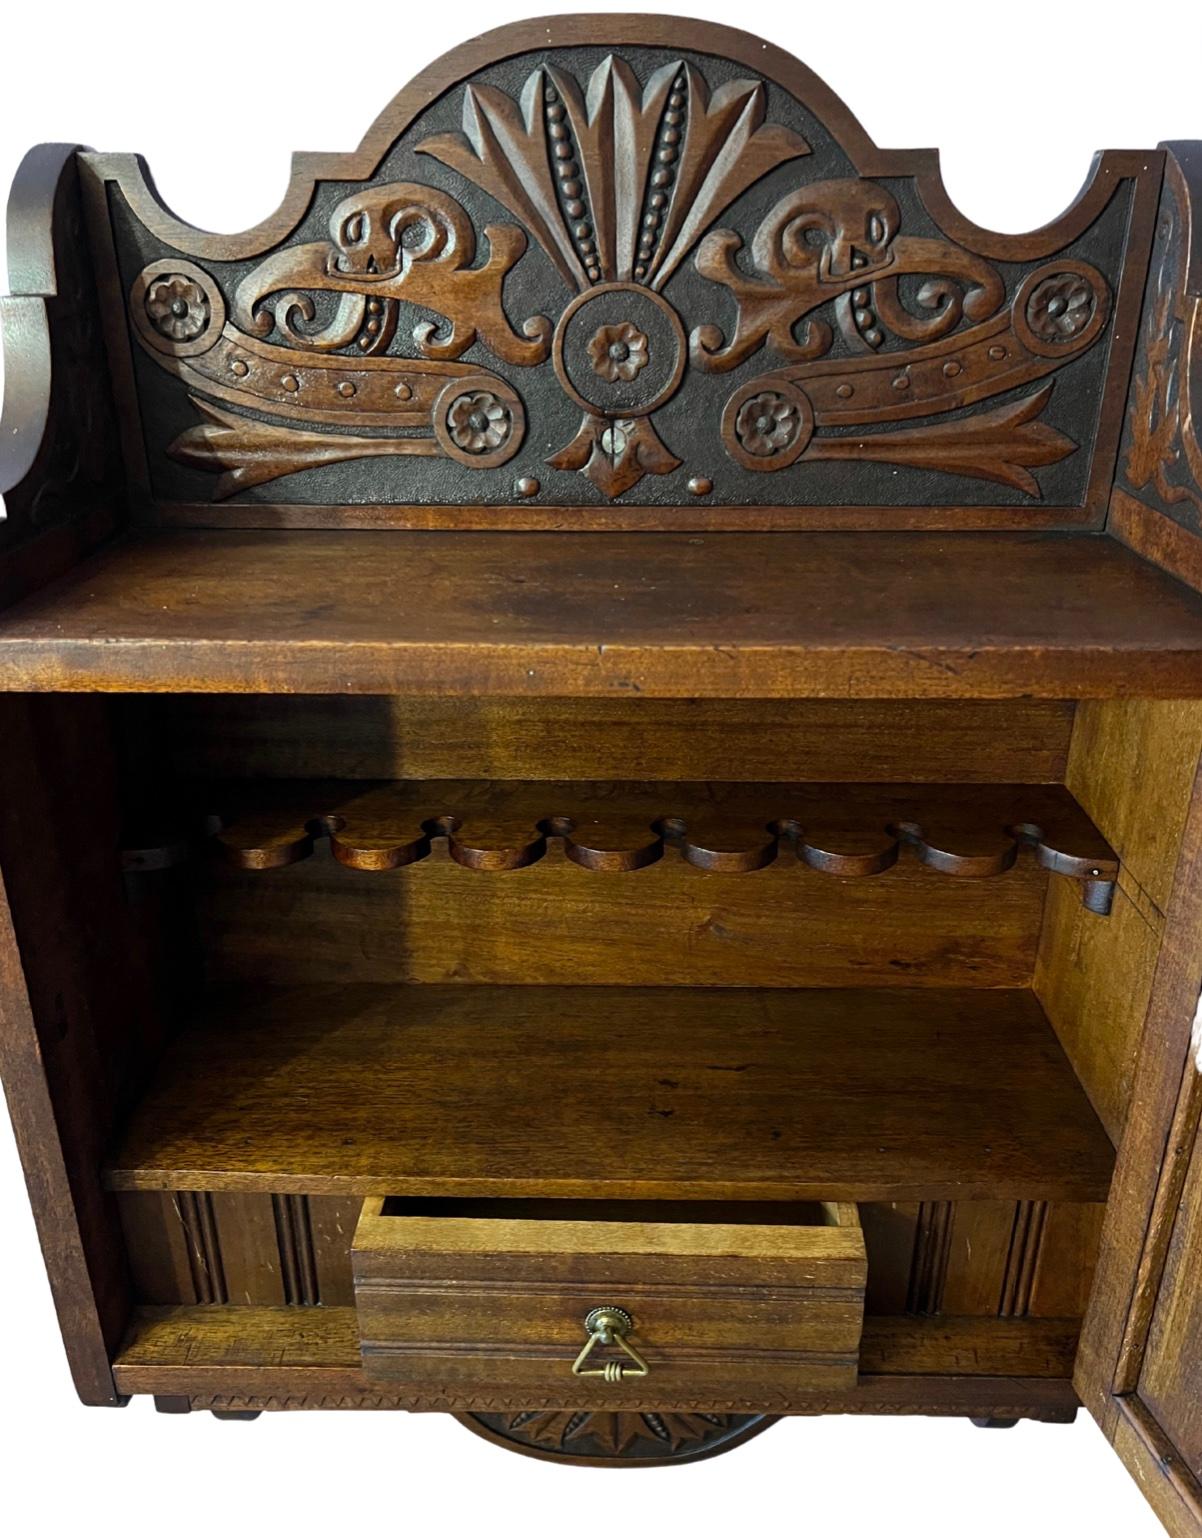 Detailed carvings on all front and sides of cabinet, comes with original key, small shelve on bottom front, sides dated 1905, when opened has 8 pipe holders and drawer, mounts onto the wall, really cool piece to use or even just to display in a man